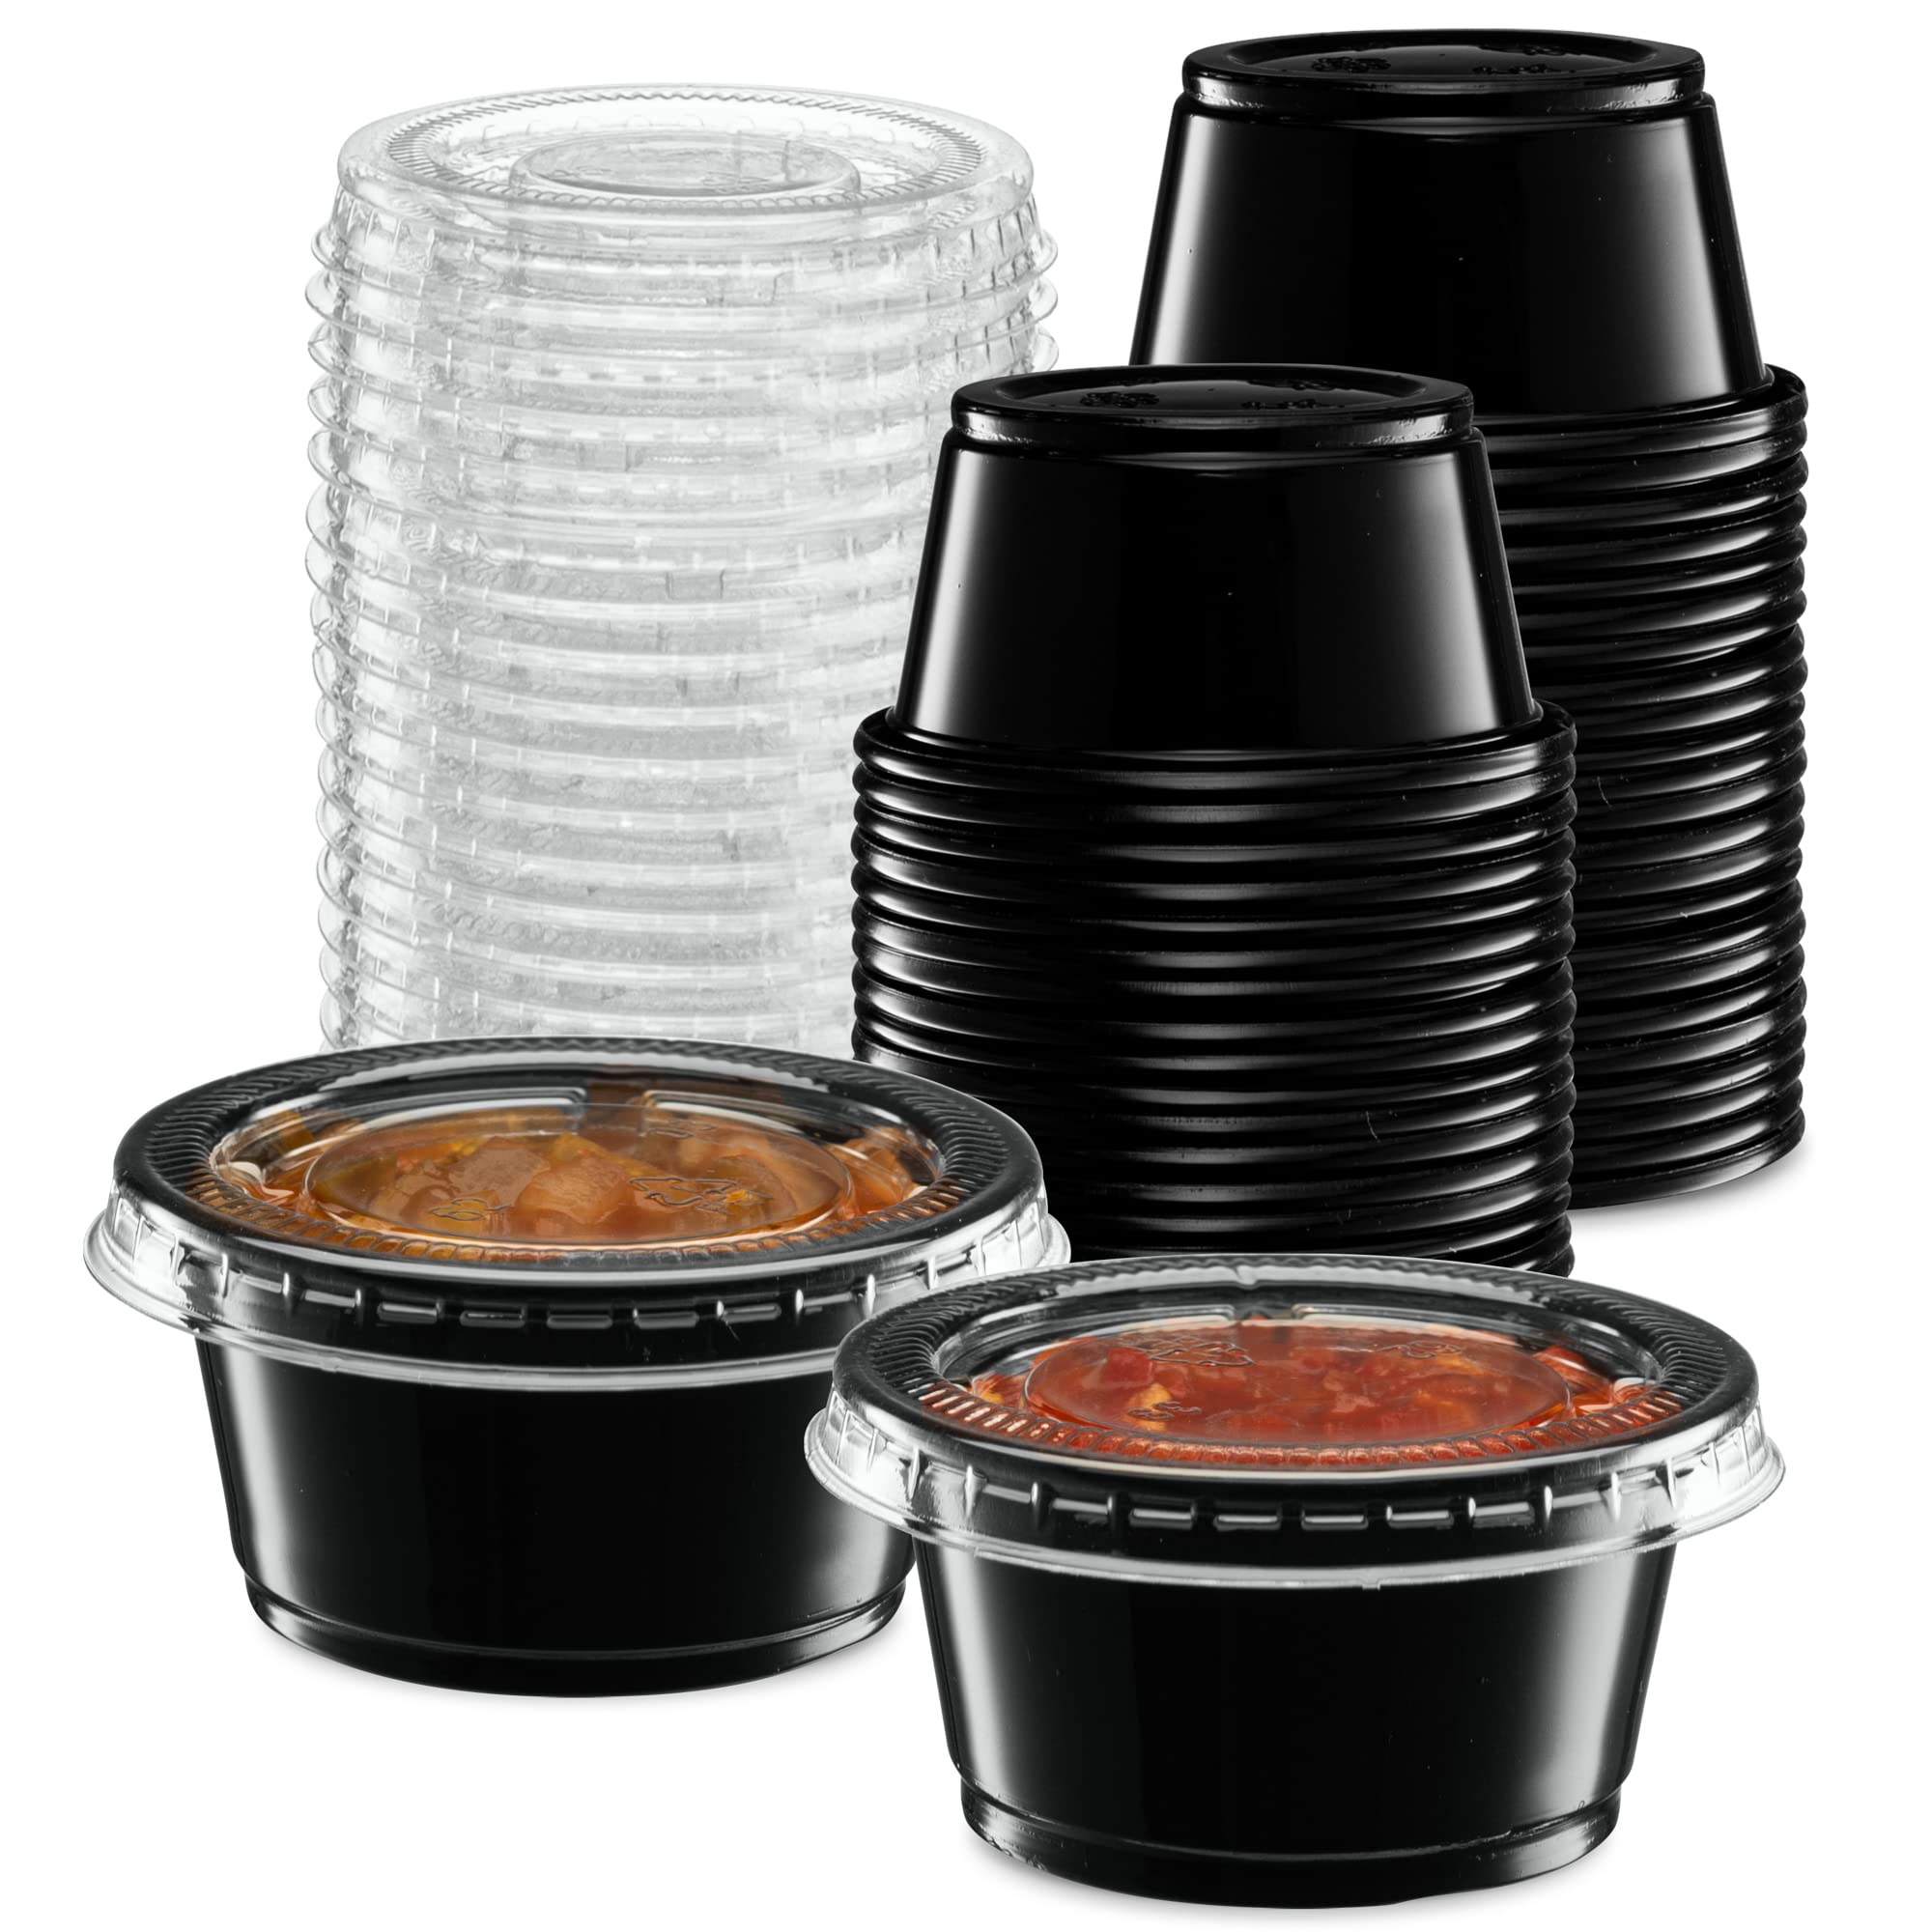 Zeml Portion Cups with Lids (2 Ounces 100 Pack) Disposable Plastic Cups for  Meal Prep Portion Control Salad Dressing Jello Shots Slime Medicine Premium Small  Plastic Condiment Container 2 oz.